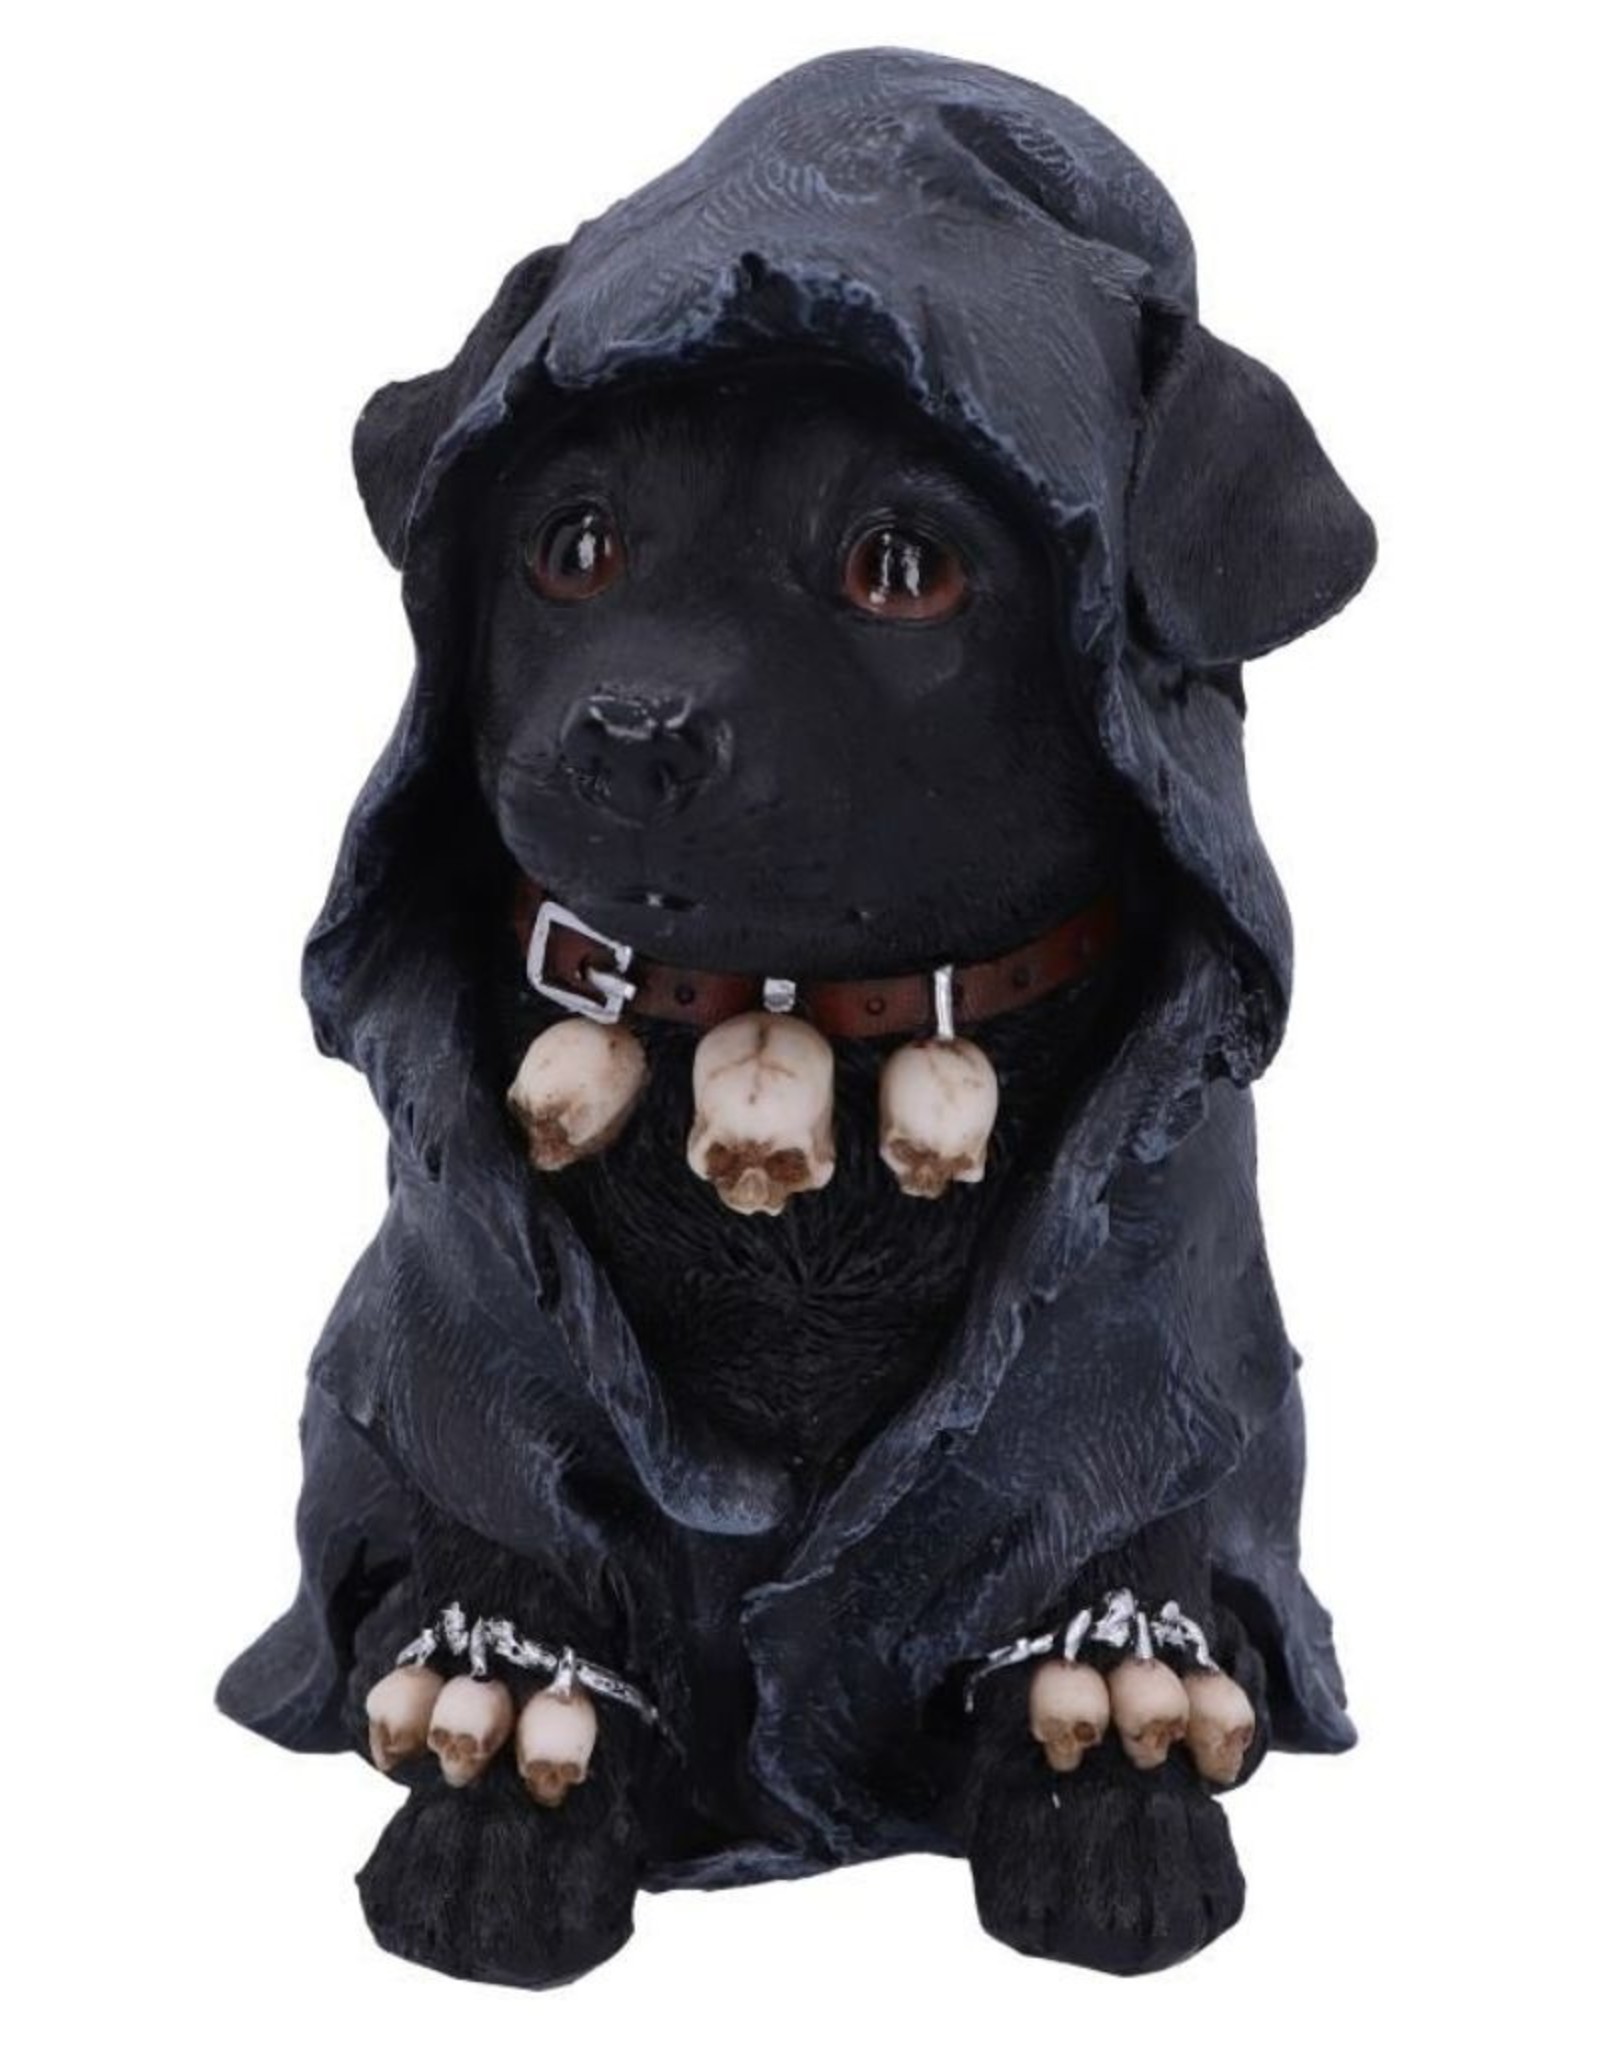 Alator Giftware and Figurines - Dog figurine Reapers Canine 17cm - Nemesis Now